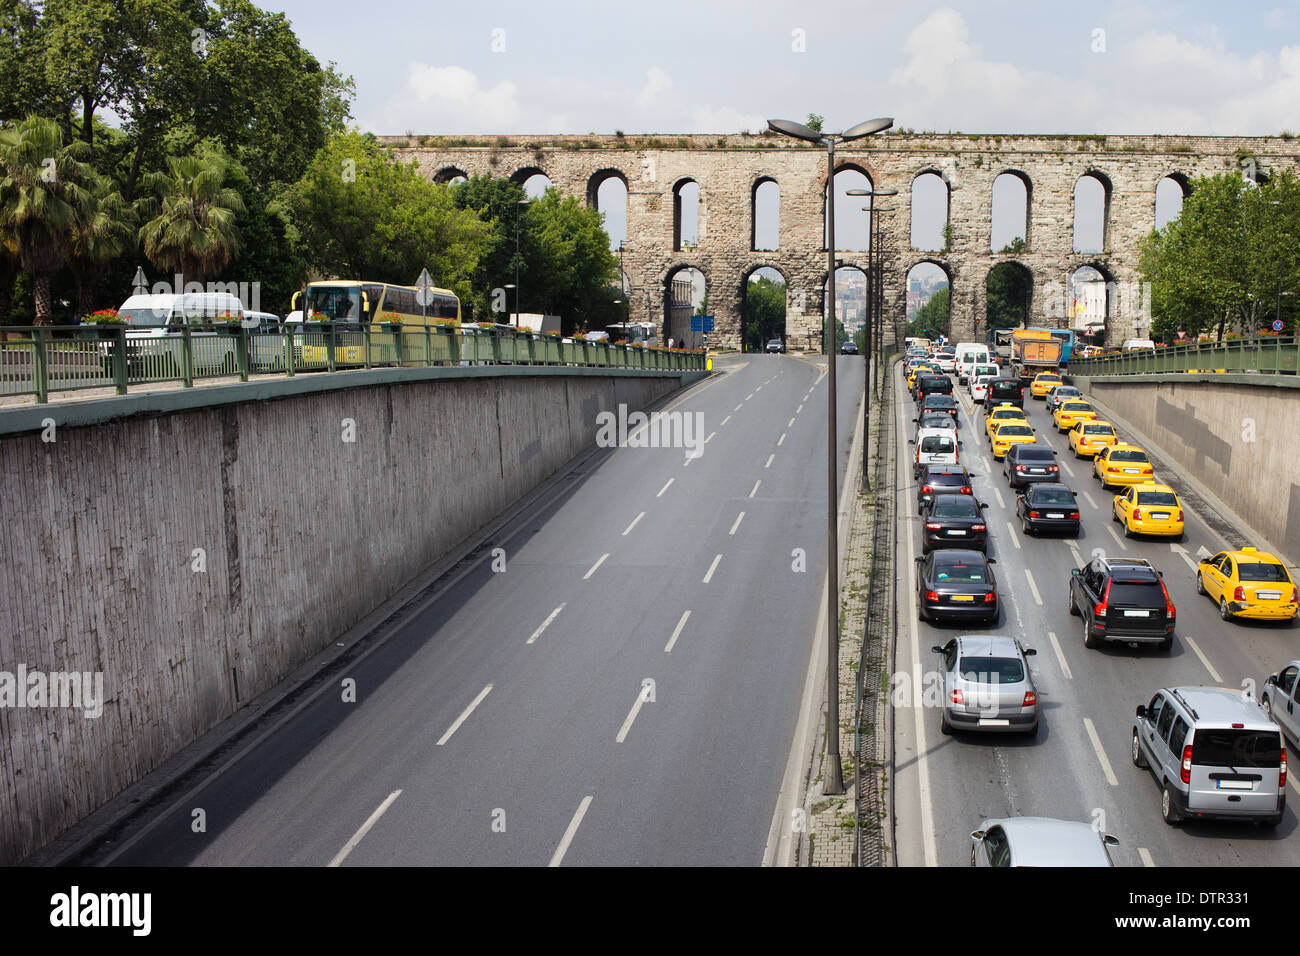 Cars on Ataturk Boulevard and Valens Aqueduct in Istanbul, Turkey. Stock Photo